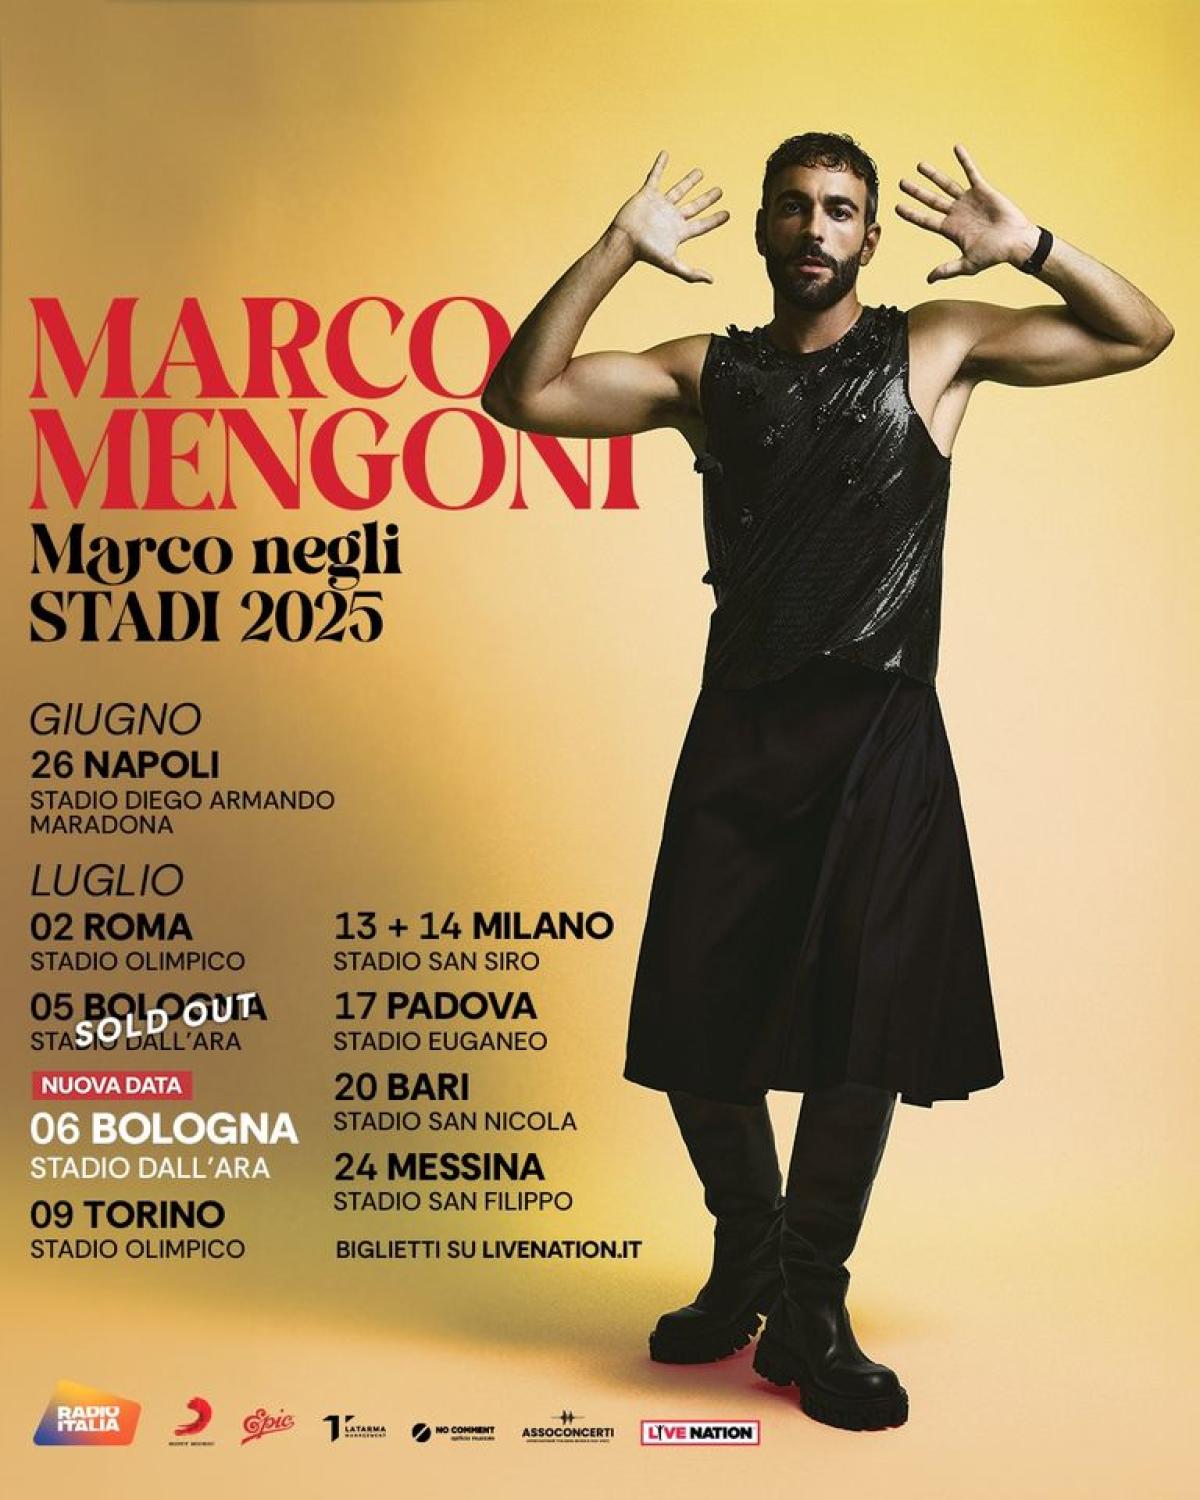 Marco Mengoni in der Stadio Dall'ara Tickets